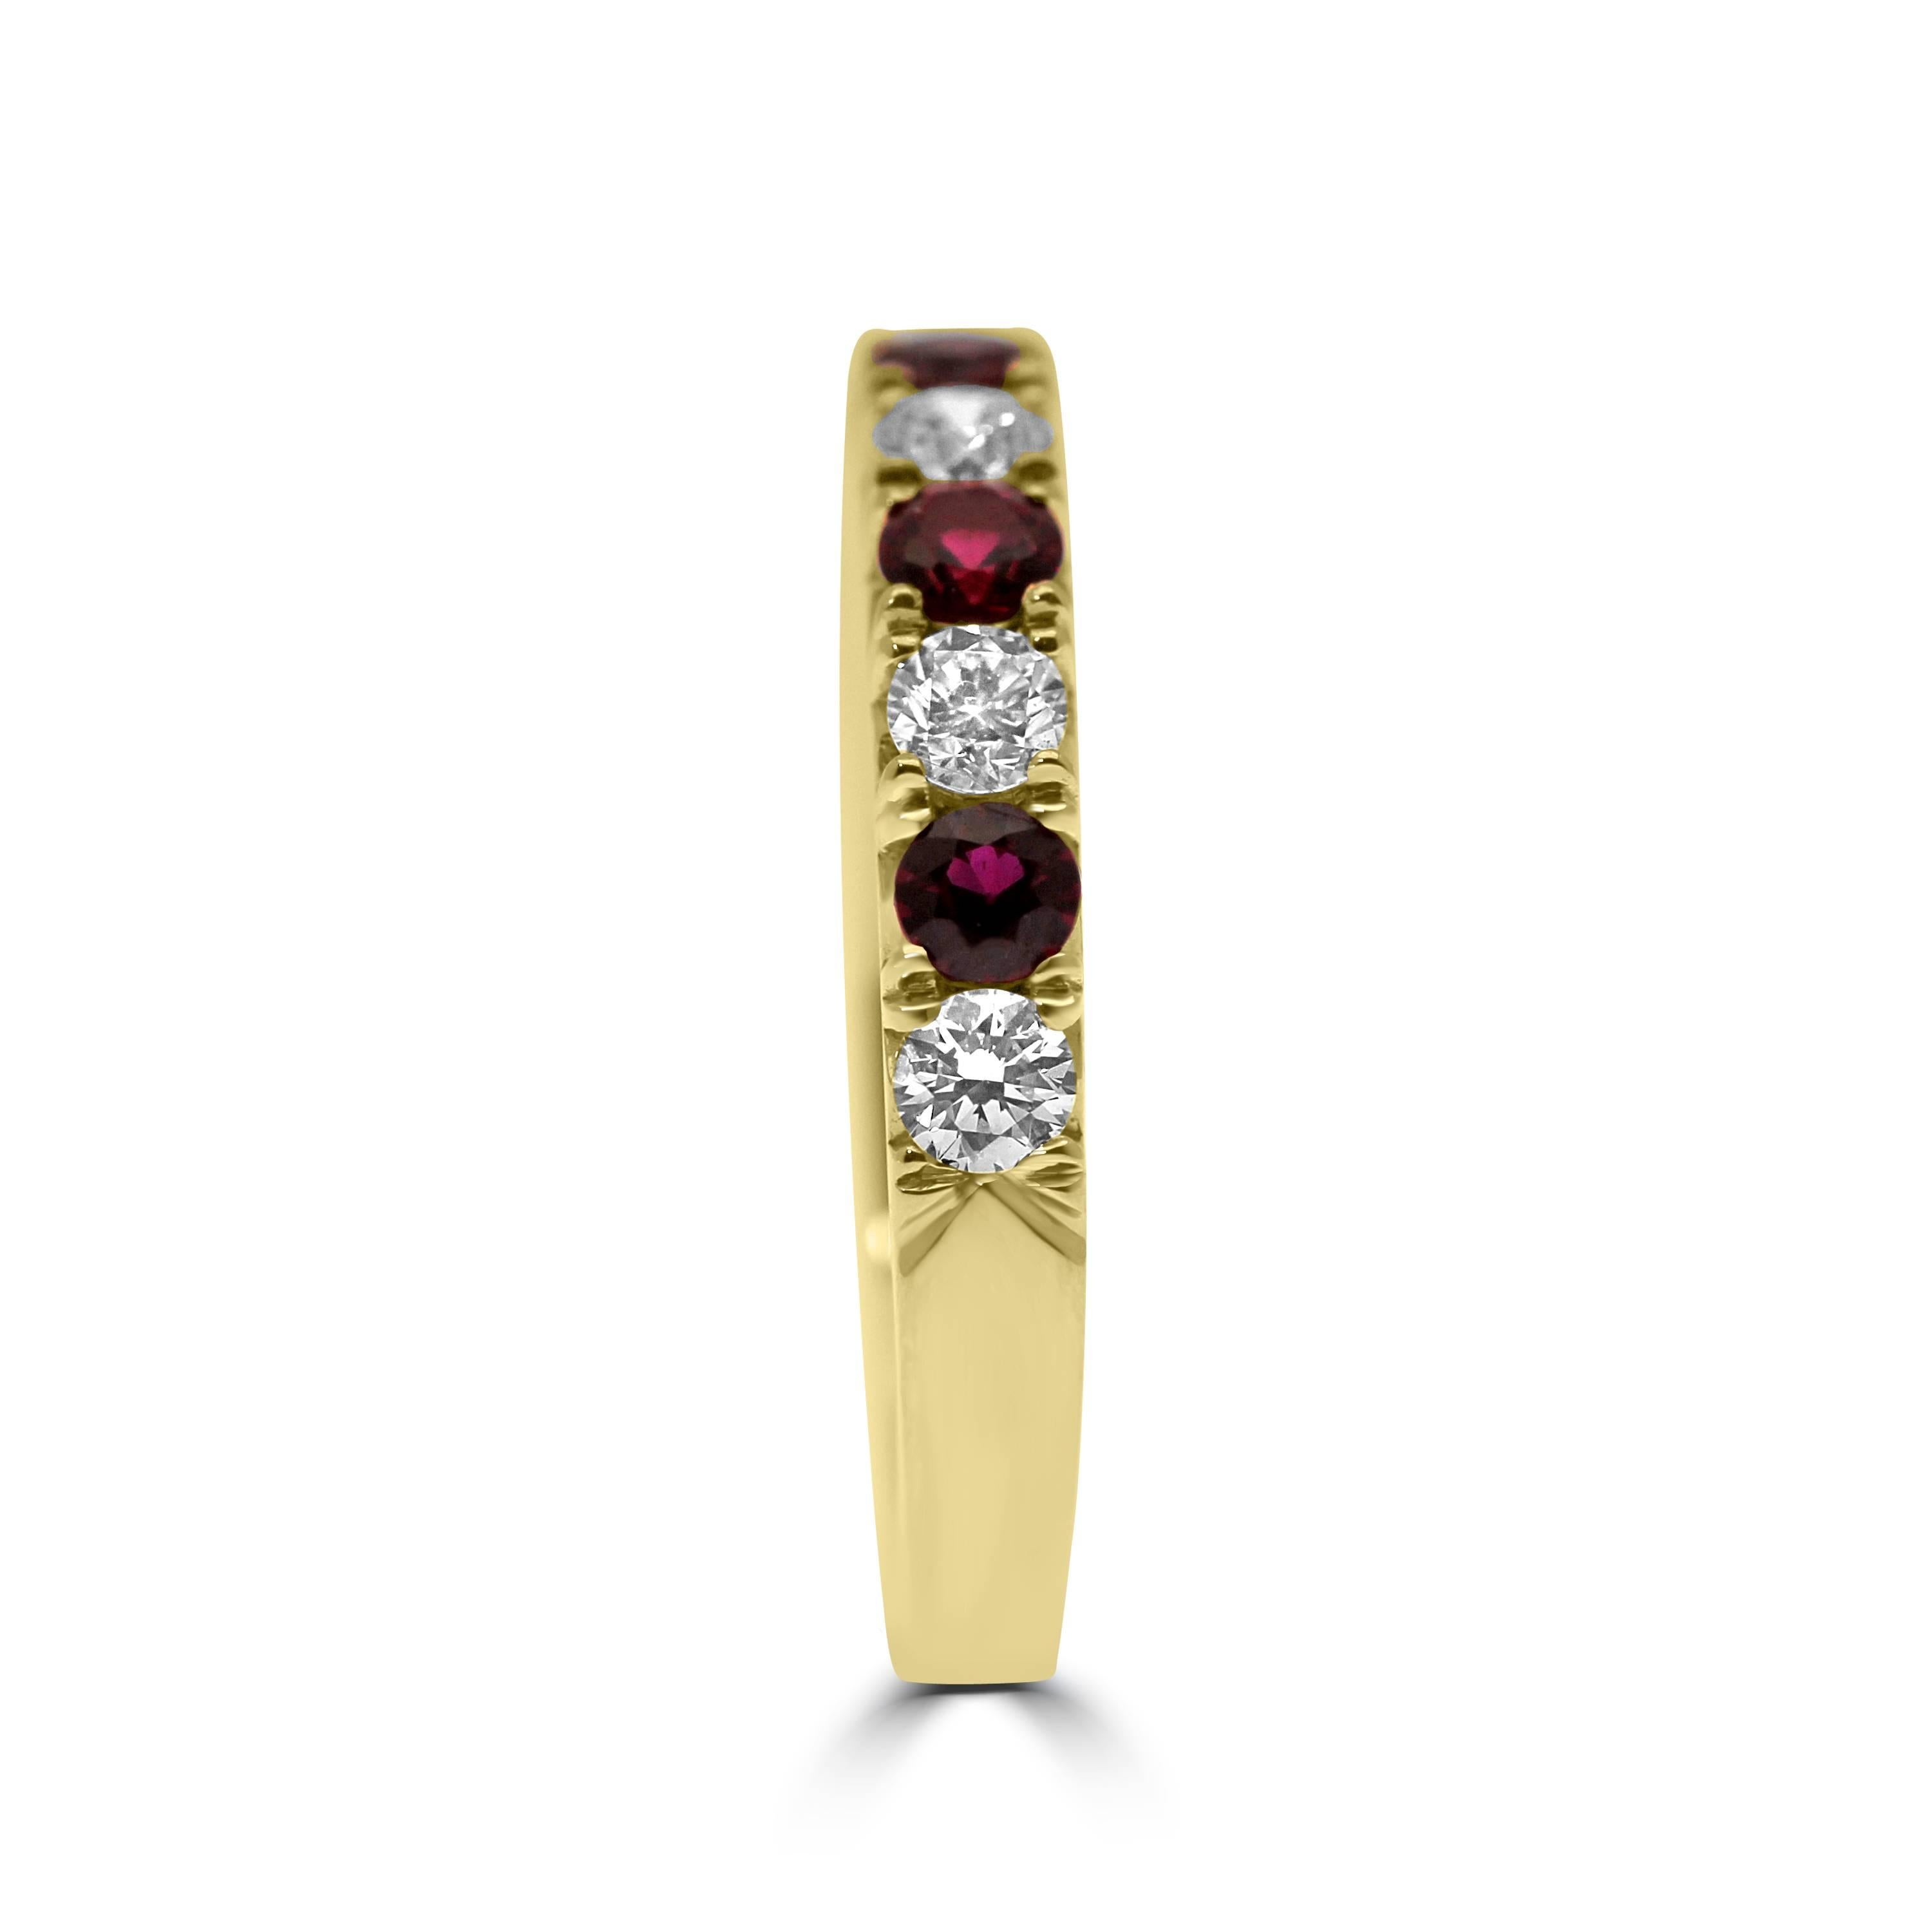 Contemporary Eternity Band Half Set with Diamonds and Ruby gemstones